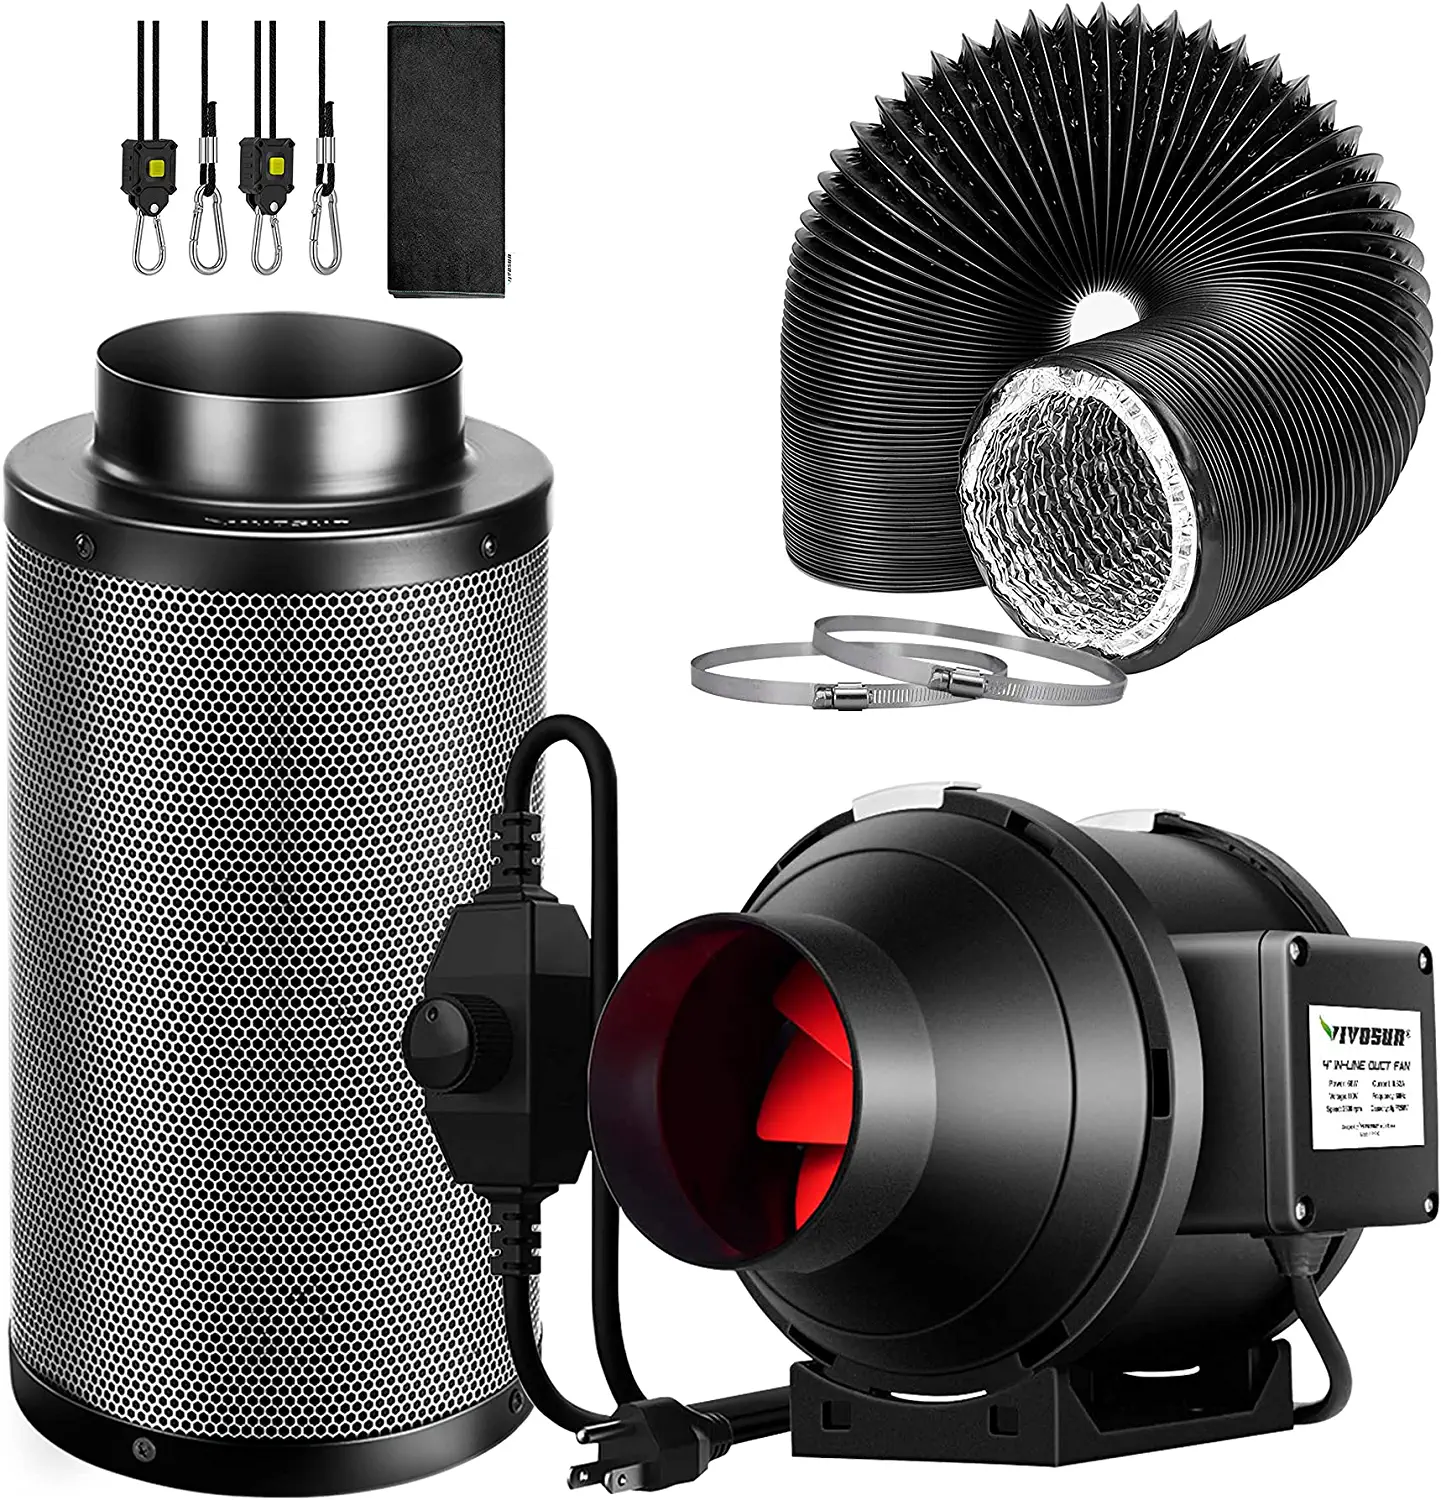 VIVOSUN 4-Inch 190 CFM Inline Duct Fan Kit with Black Carbon Filter and Black Ducting